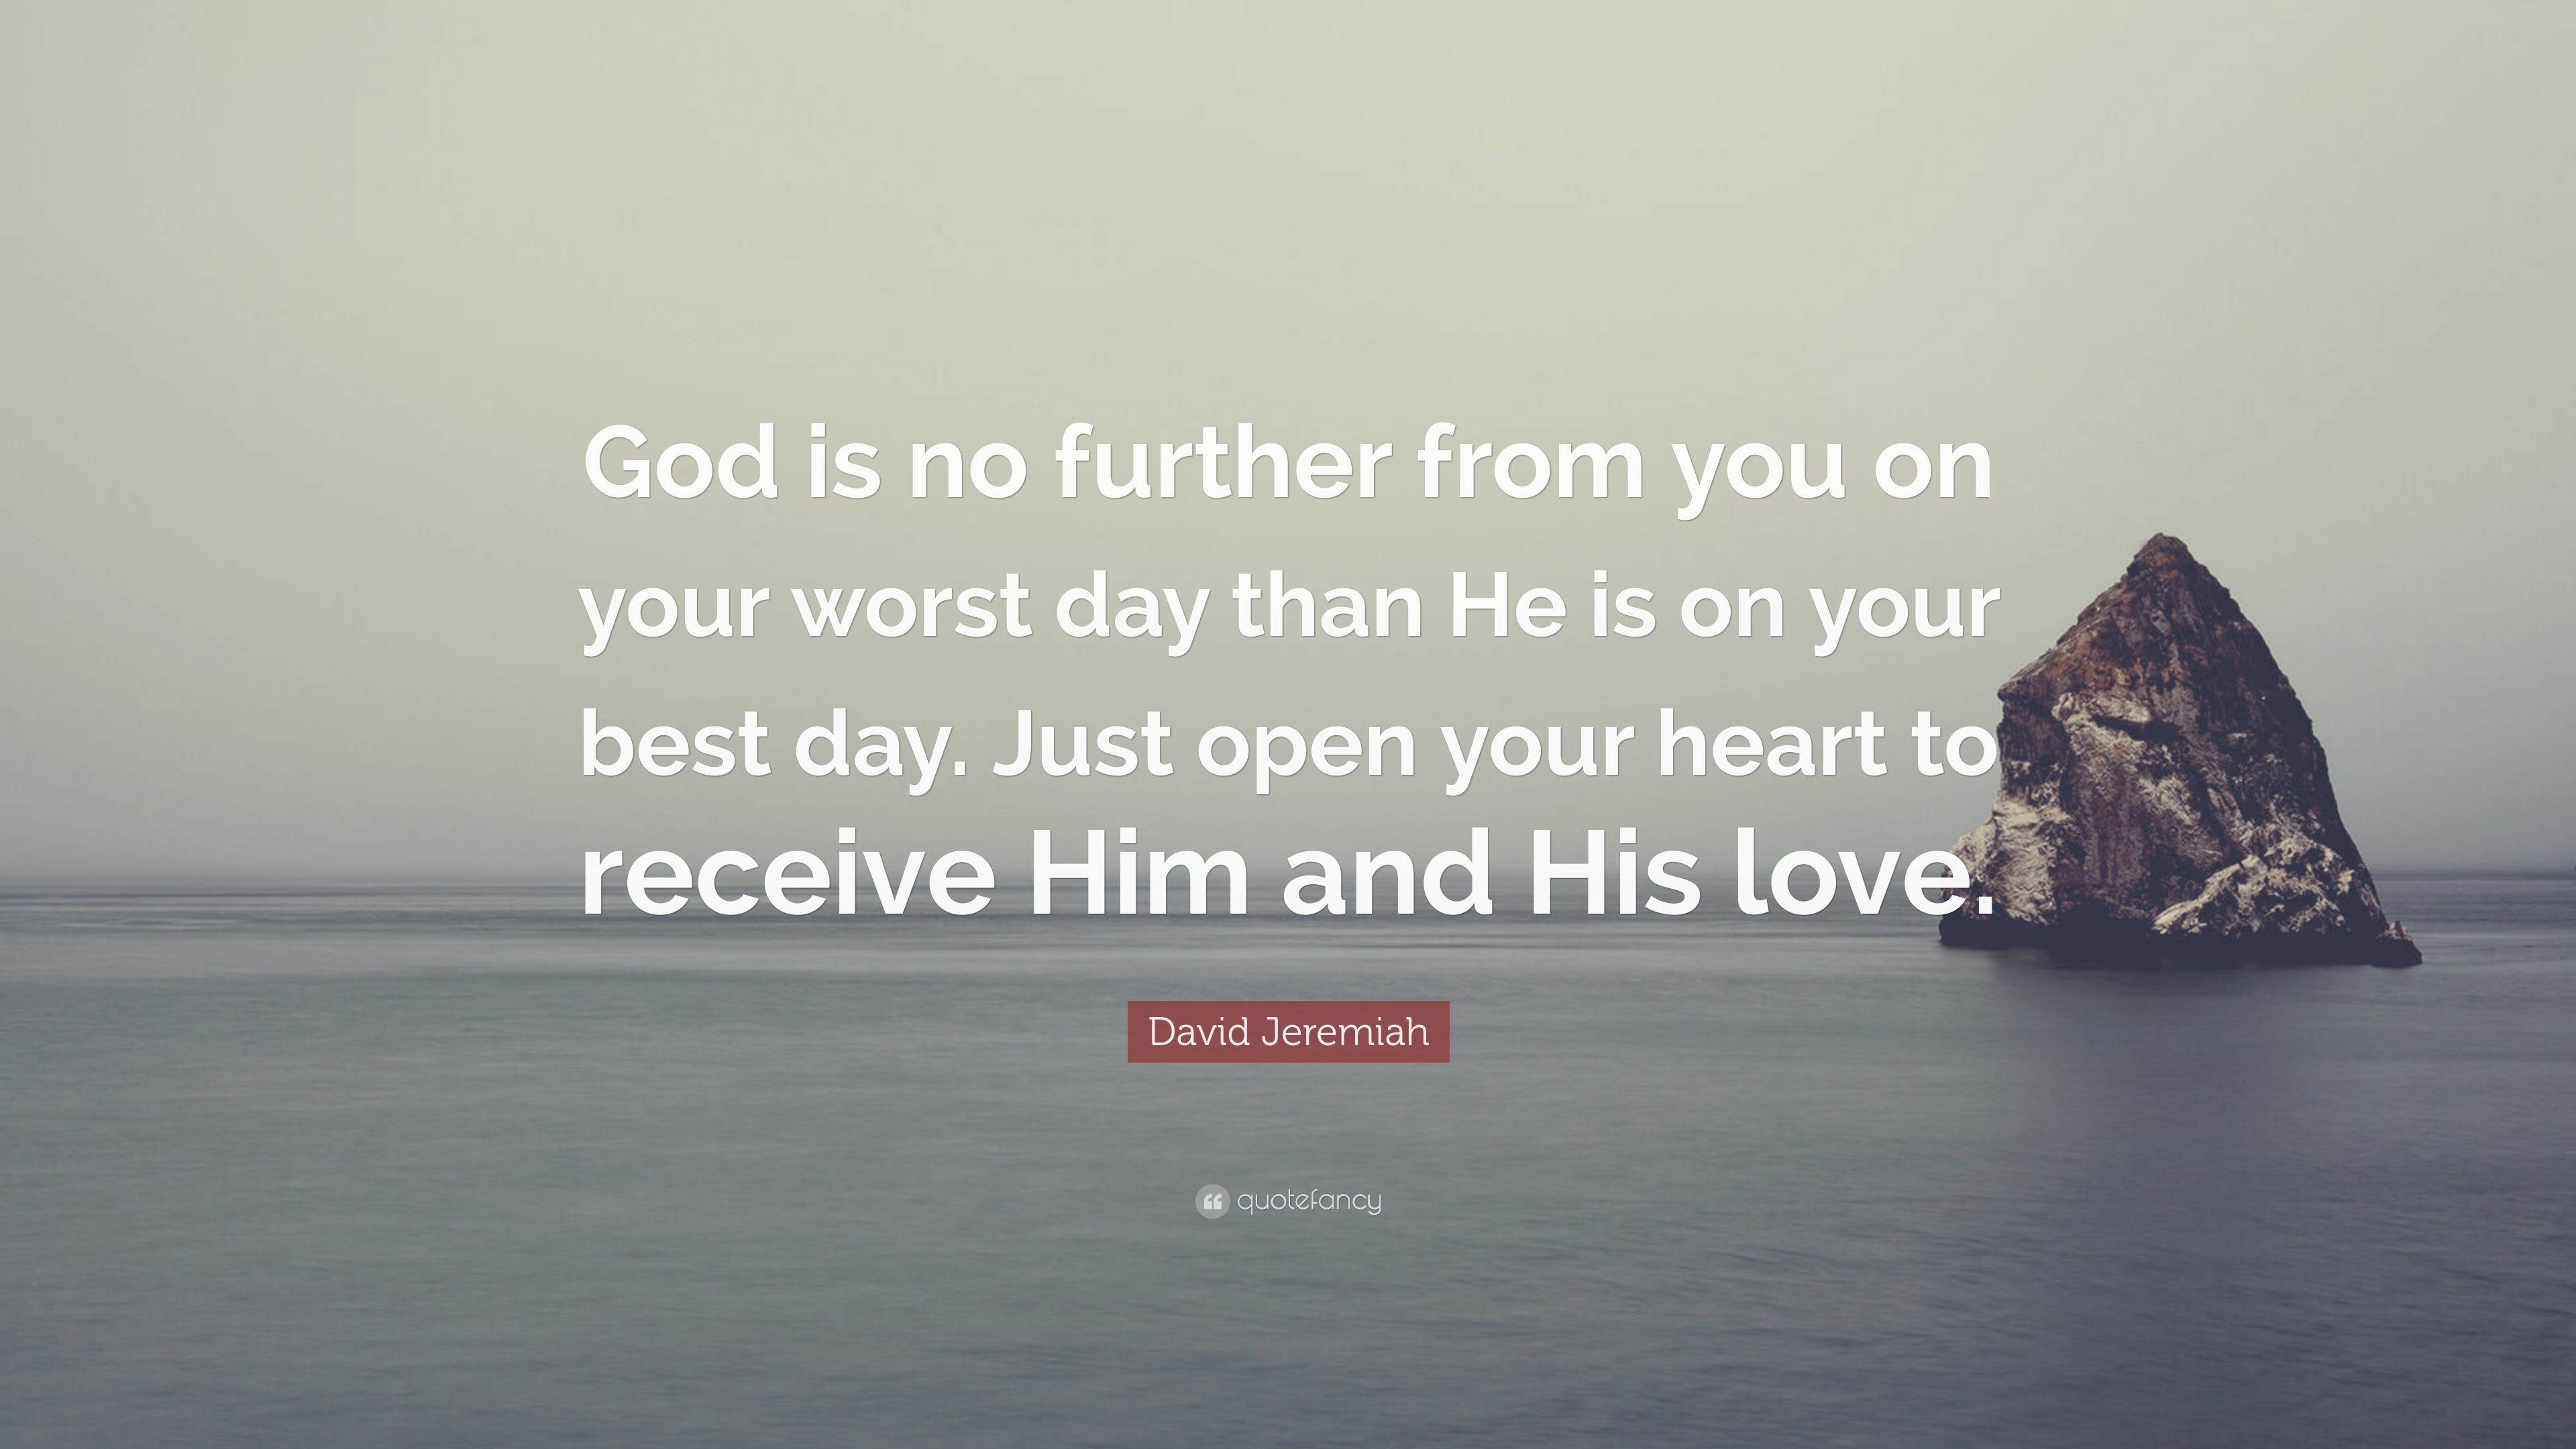 David Jeremiah Quote “God is no further from you on your worst day than